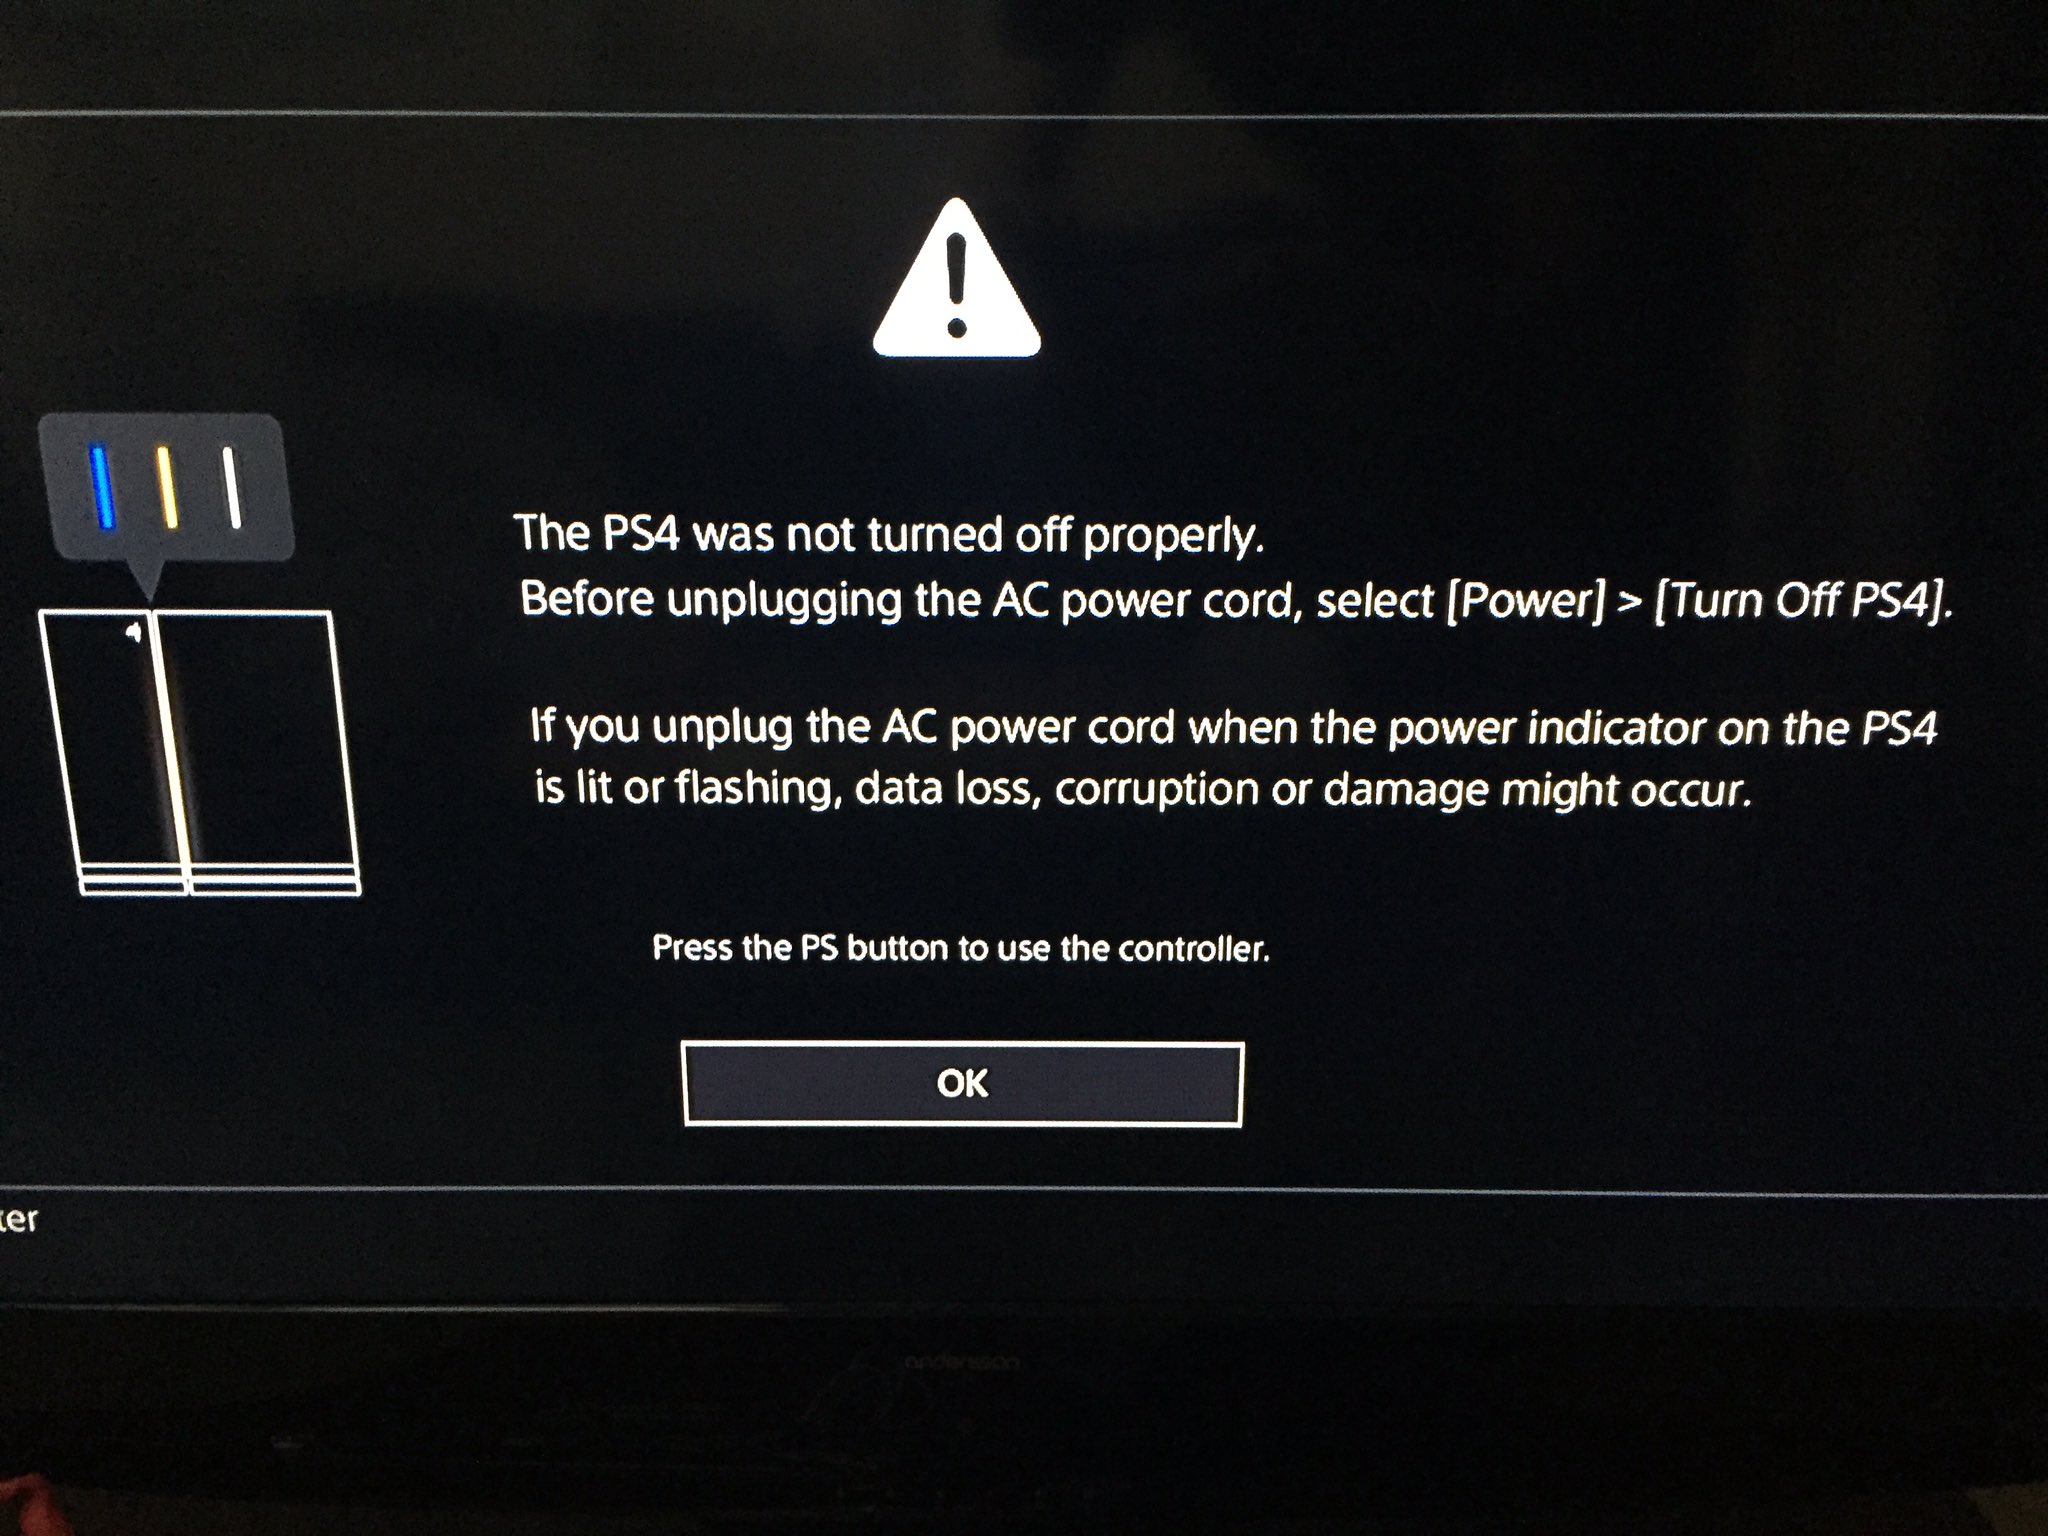 Begravelse vision lur Kristoffer Warnberg on Twitter: "The #PS4 automatically turned off due to  my power saving settings. Then I get this message...  https://t.co/2OxIaKcU1r" / Twitter